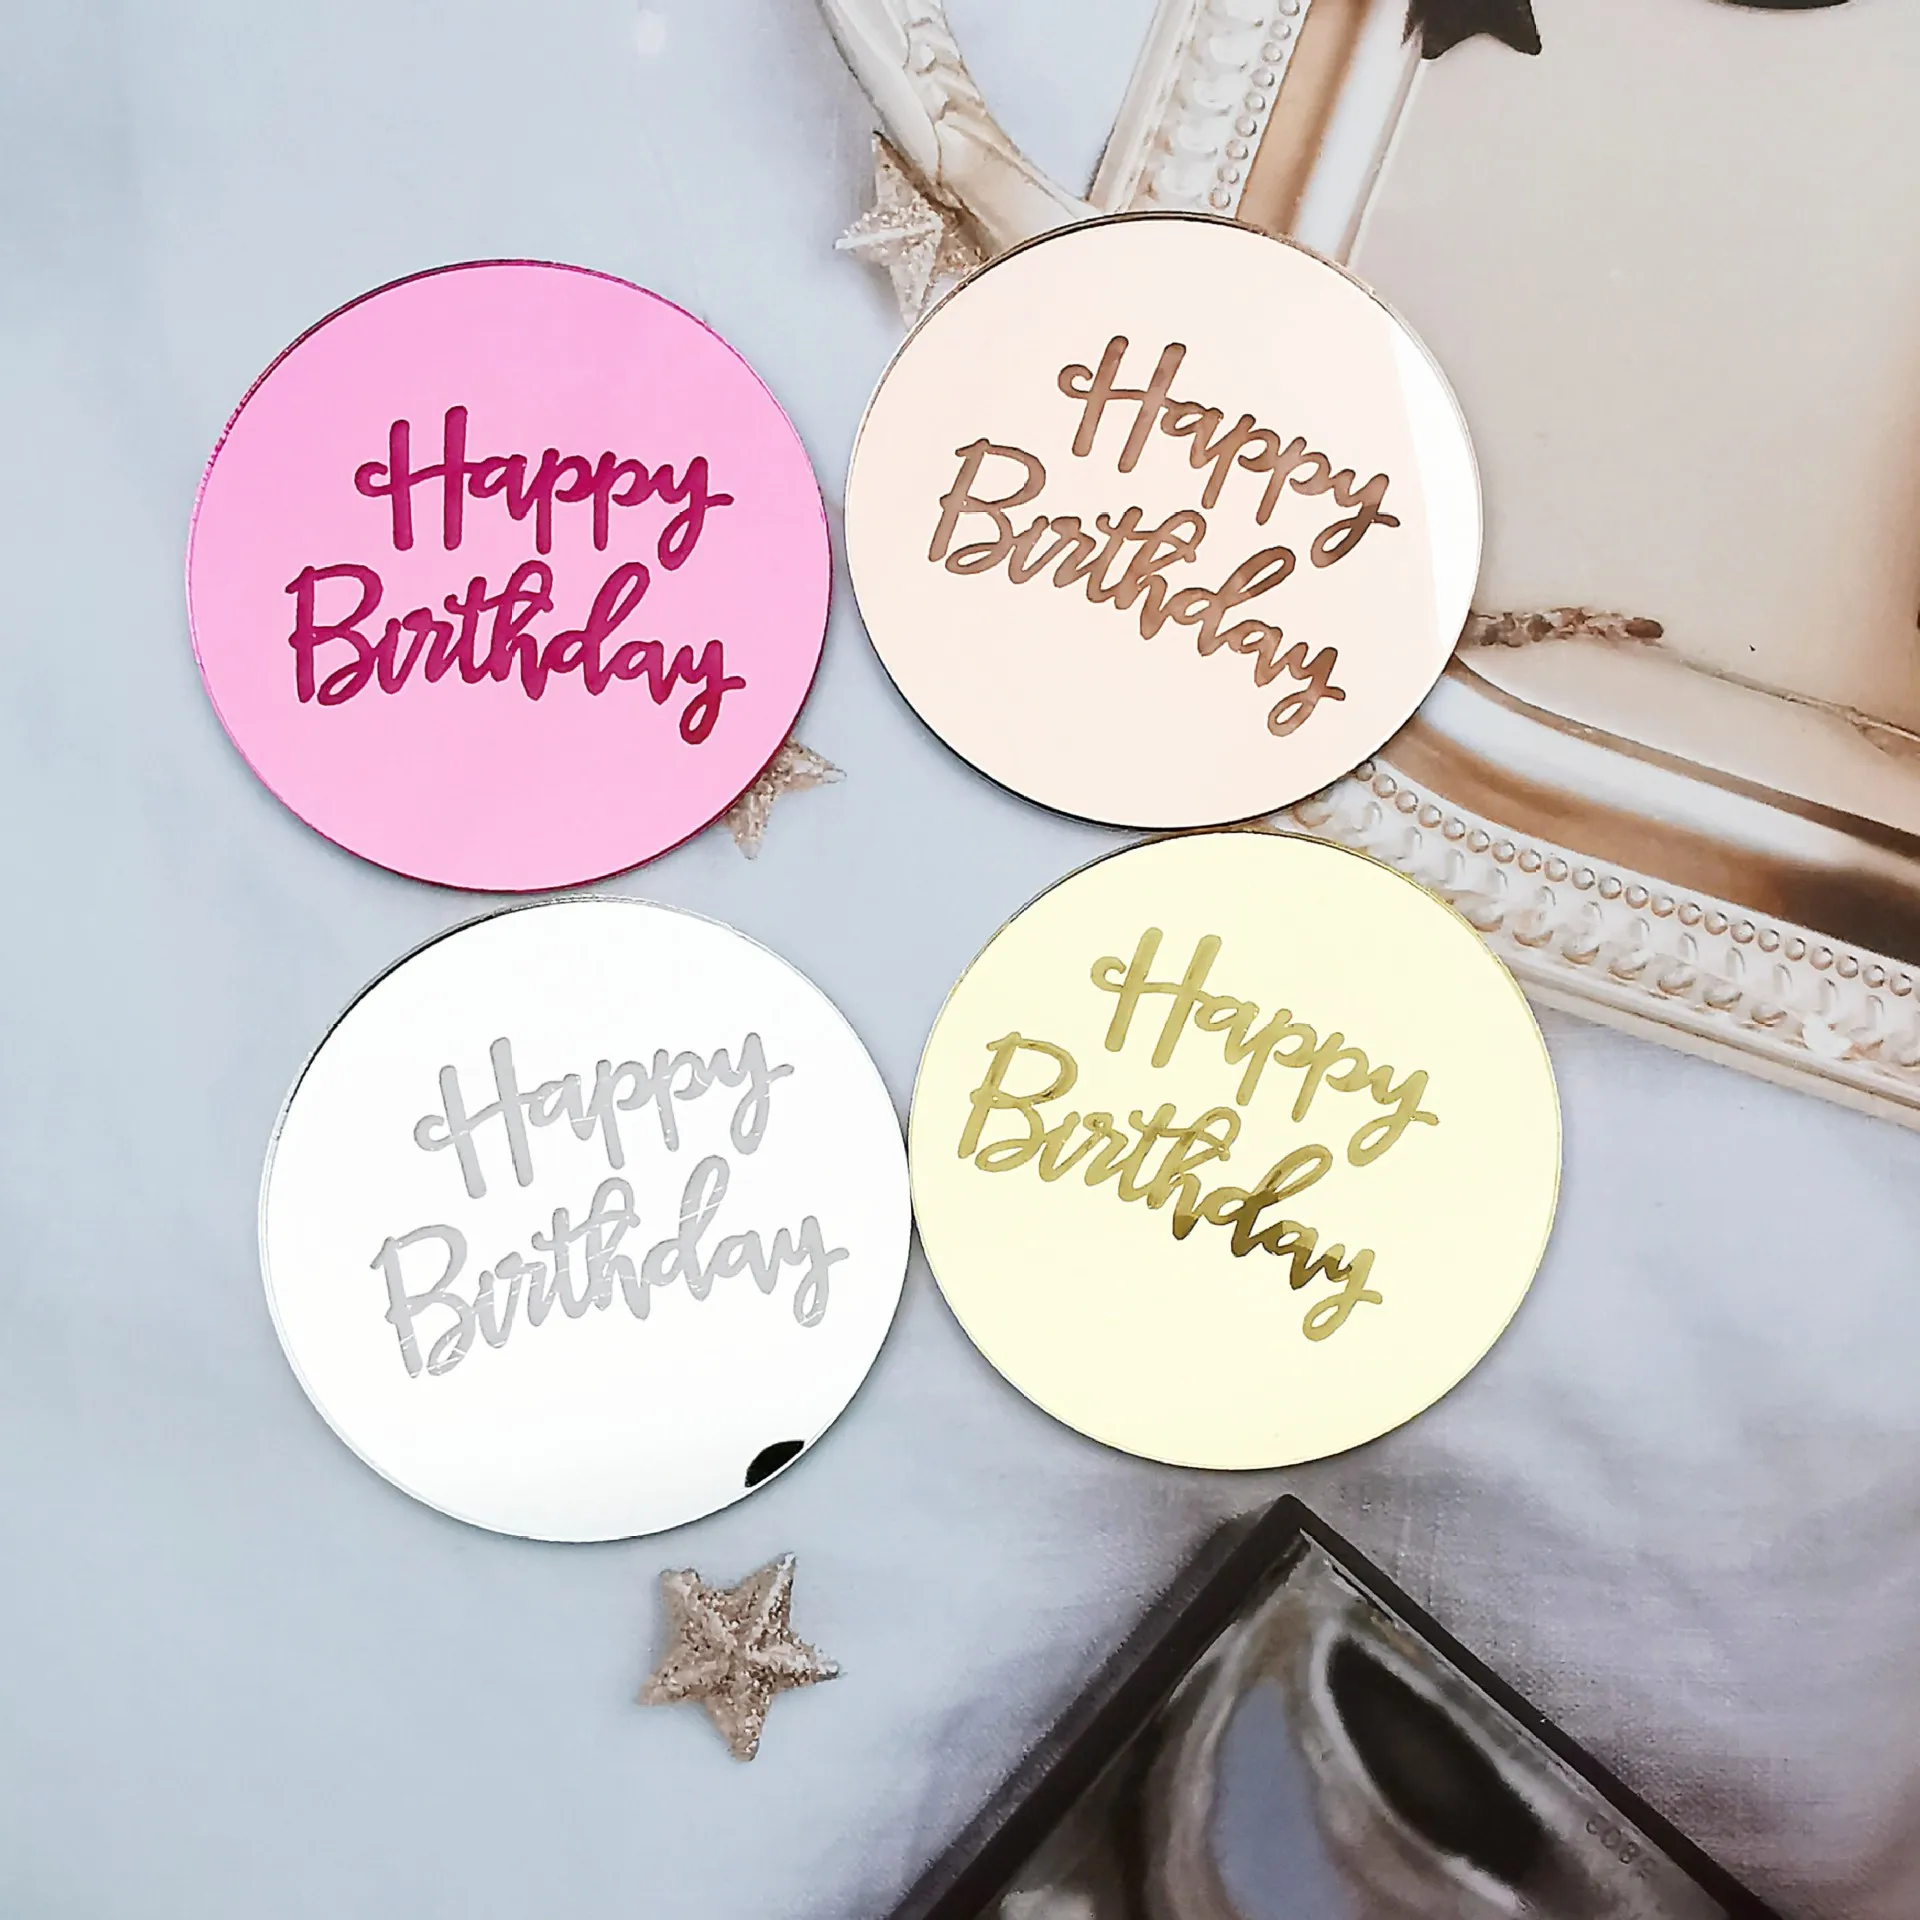 5PCS Circular Laser Marking Acrylic Happy Birthday Cake Decoration Party Favors Supplies Baking Decorating Tools Baby Shower